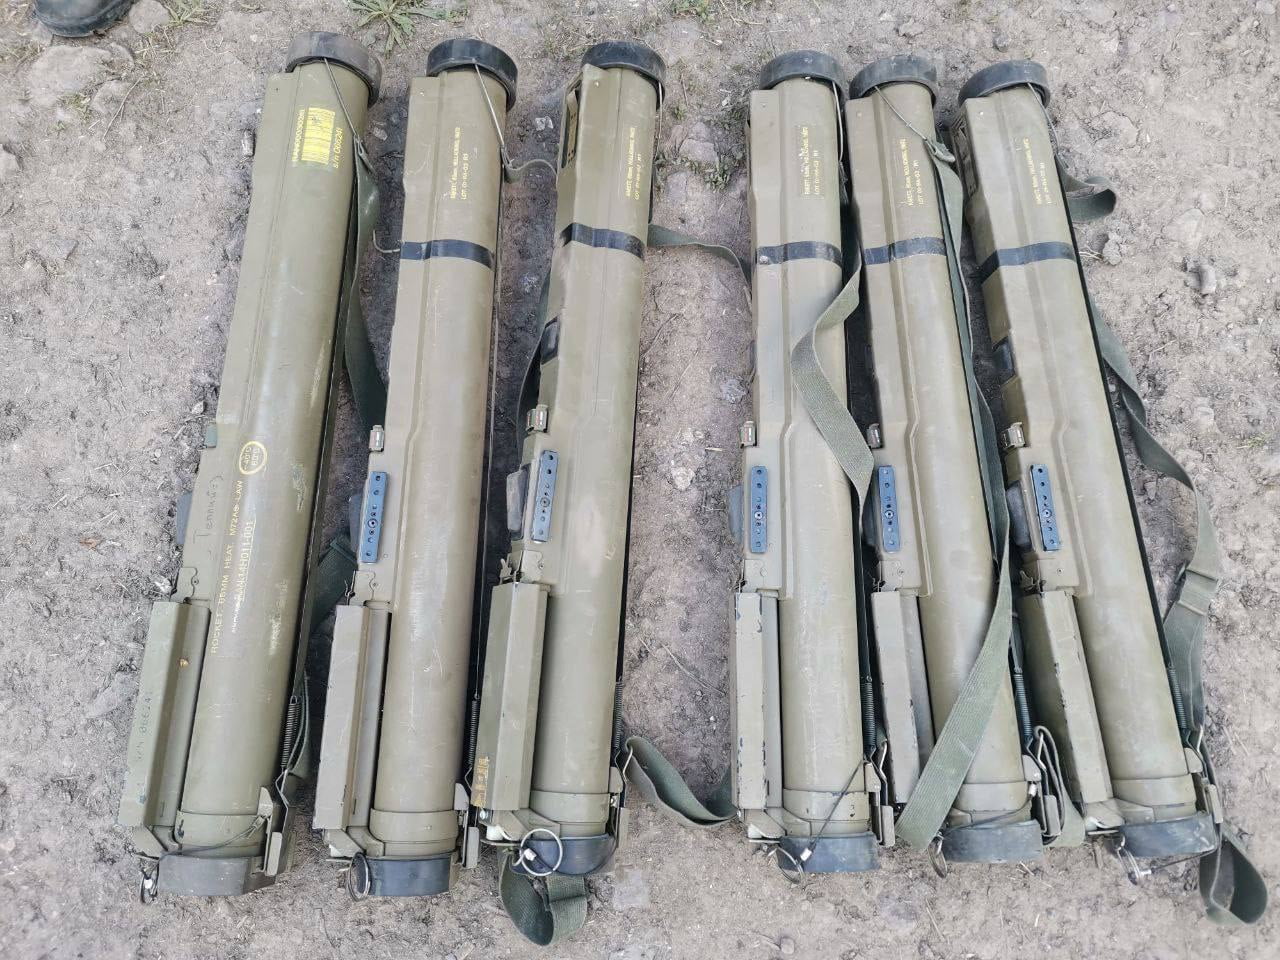 NATO weapons captured by Russian forces. You're paying more...